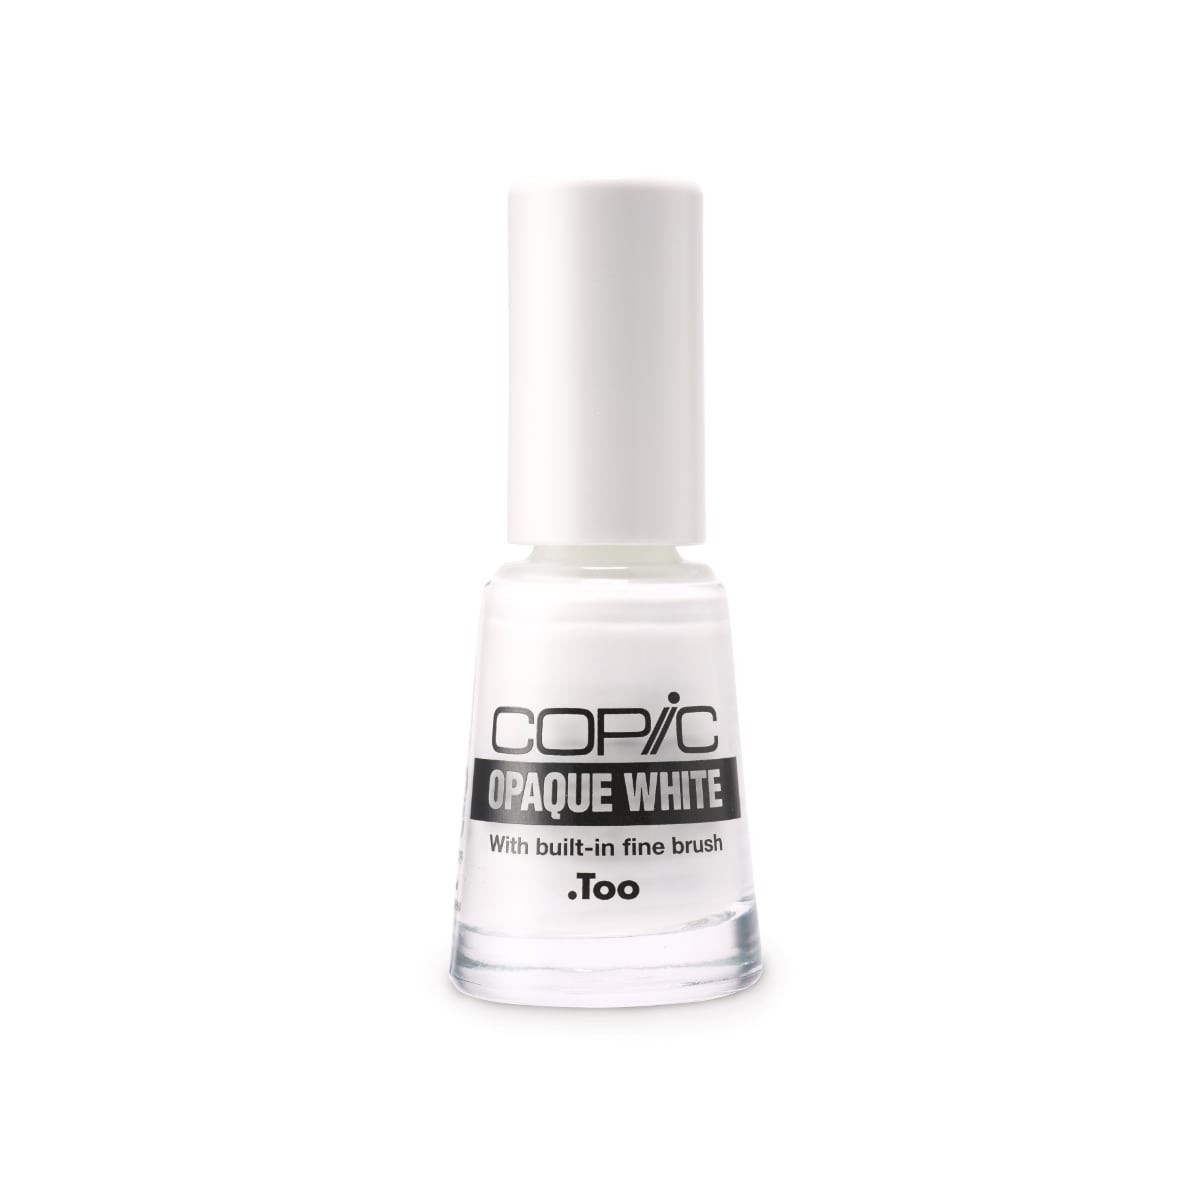 Copic Opaque White with fine brush, 6ml